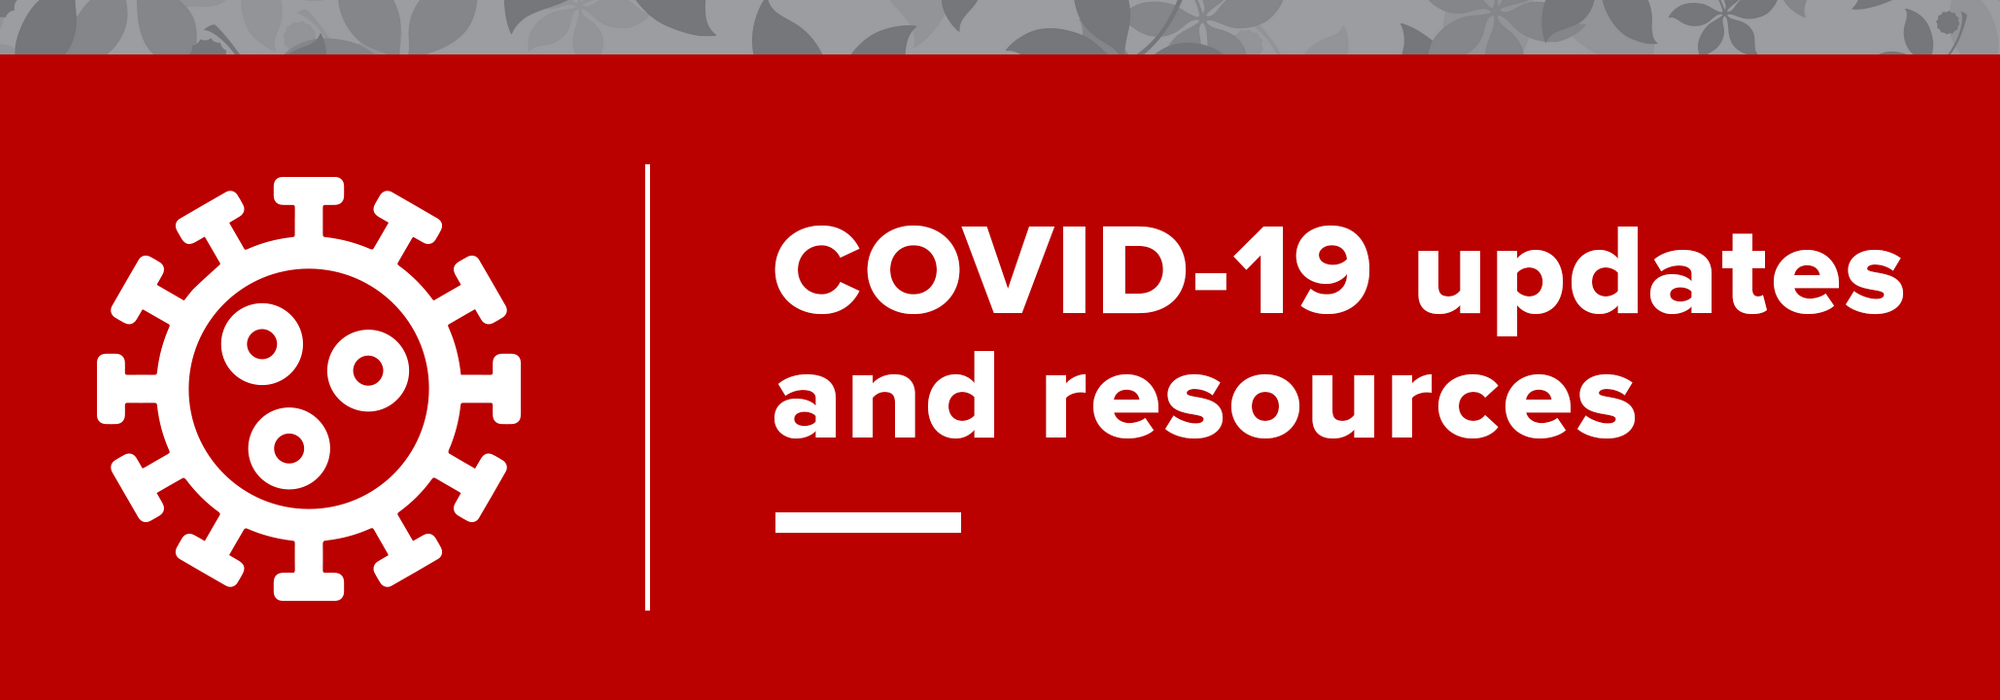 COVID-19 updates and resources